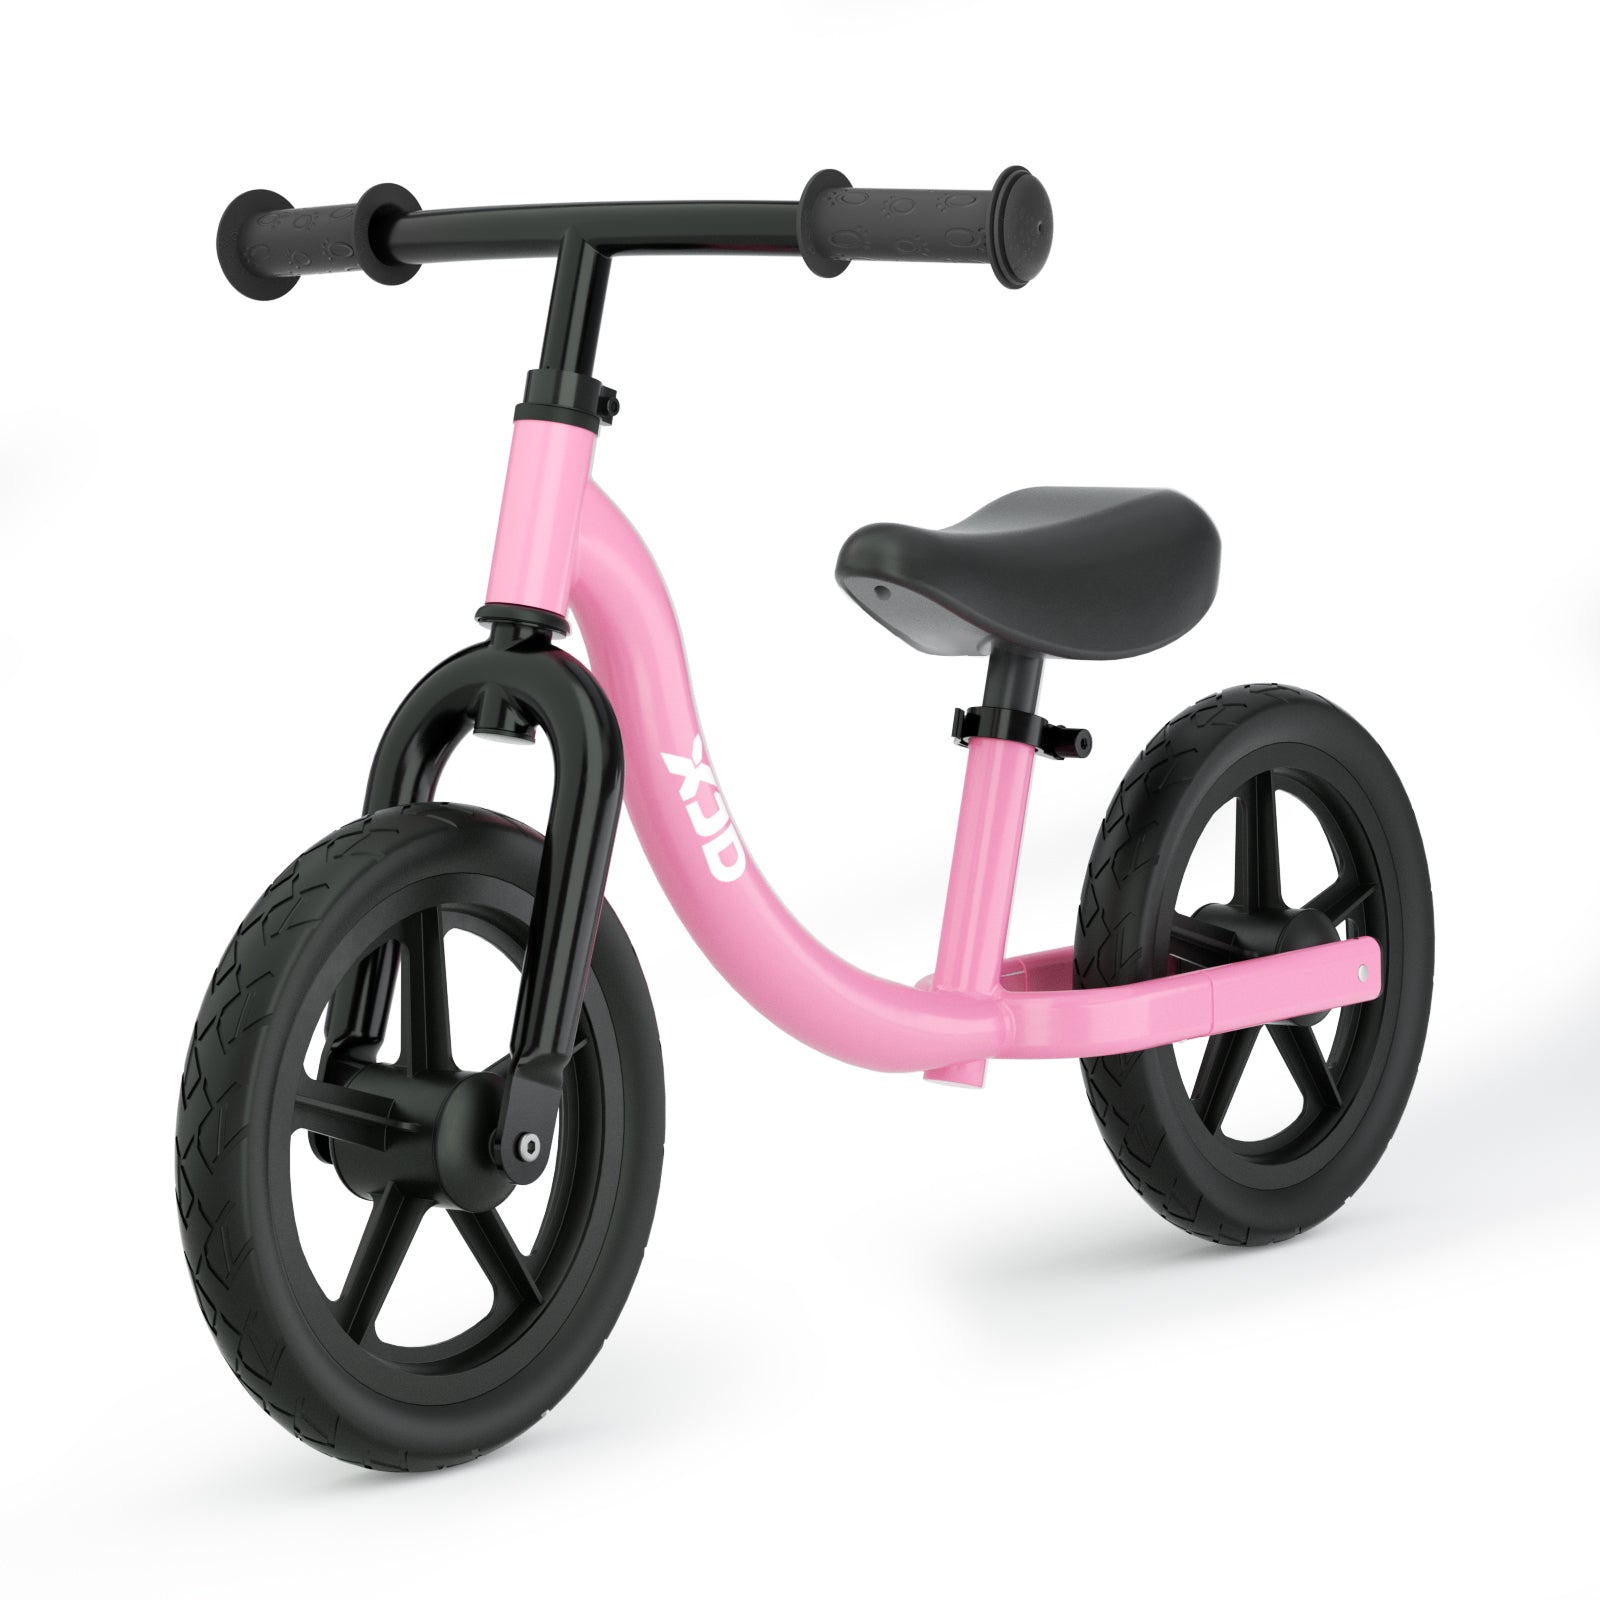 XJD Toddler Balance Bike No Pedal Bicycle for Girls Boys Ages 18 Months to 5 Years Old Pink